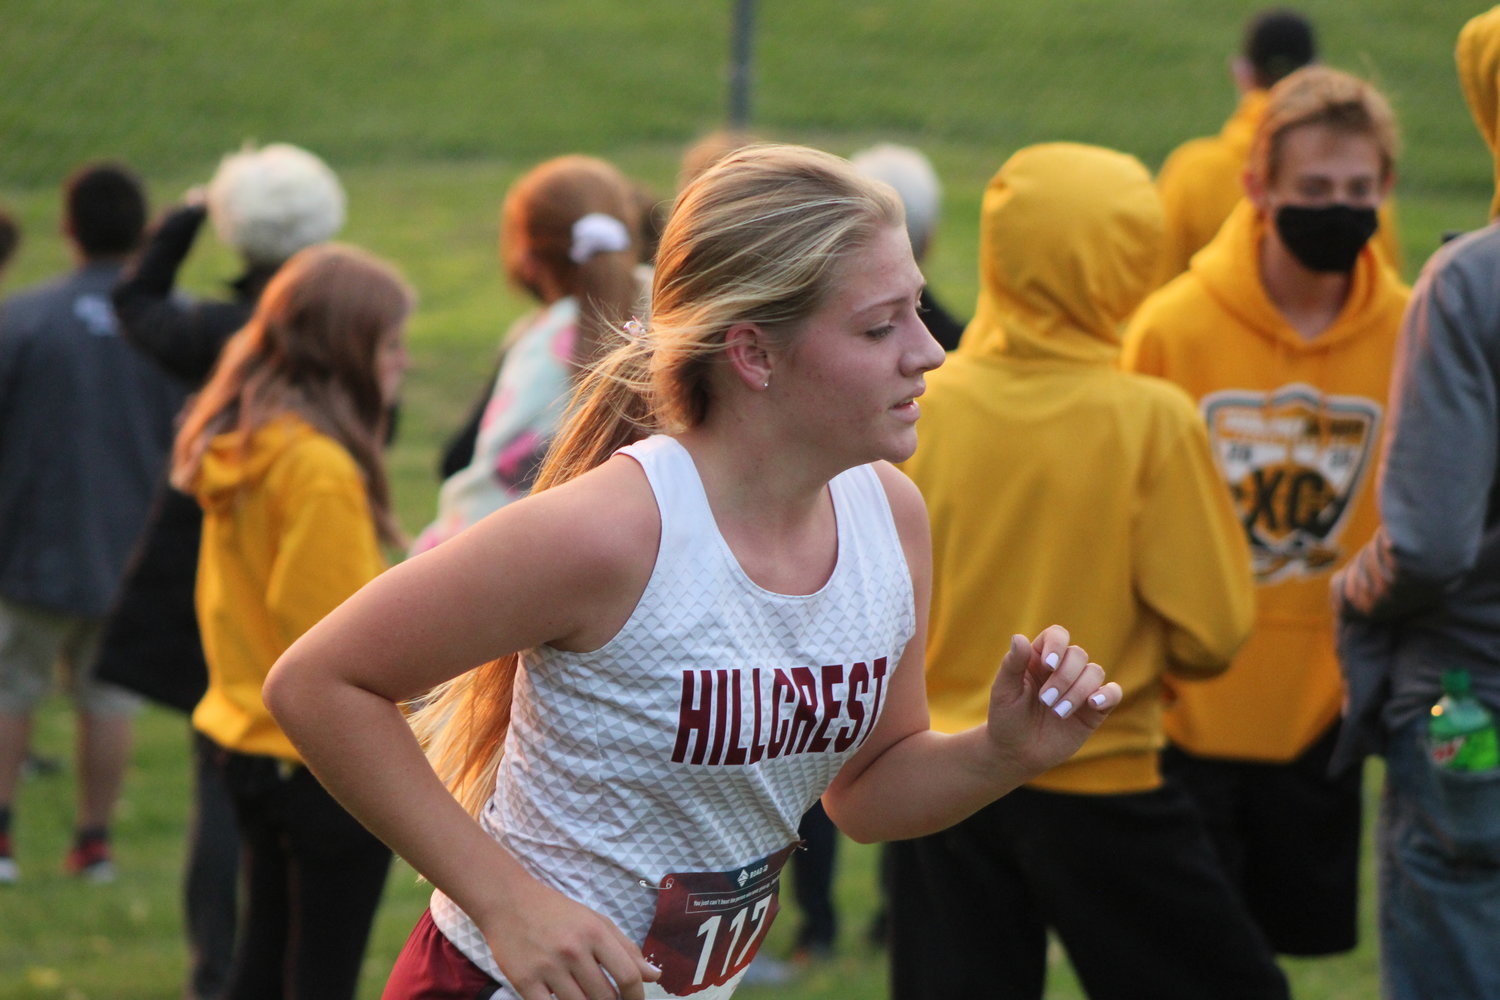 Kennedy Roth of Hillcrest Academy heads up a hill and toward the finish line in Monday’s girls varsity race.